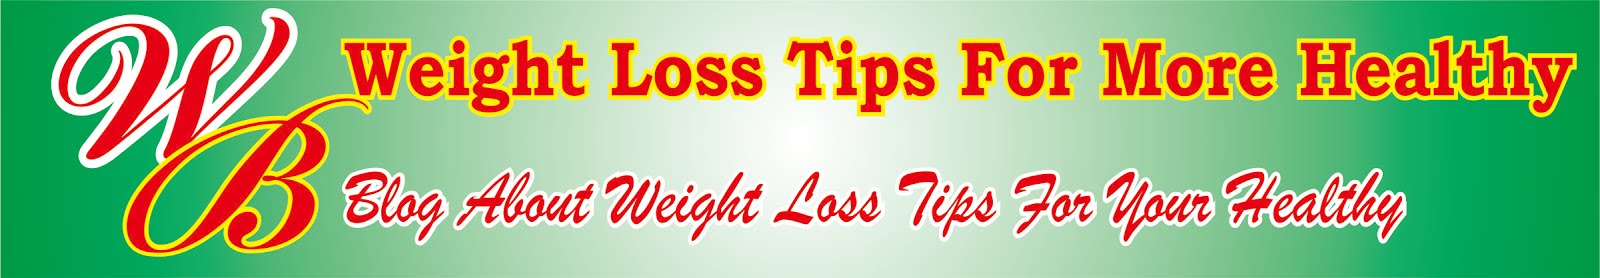 Weight Loss Tips For More Healthy